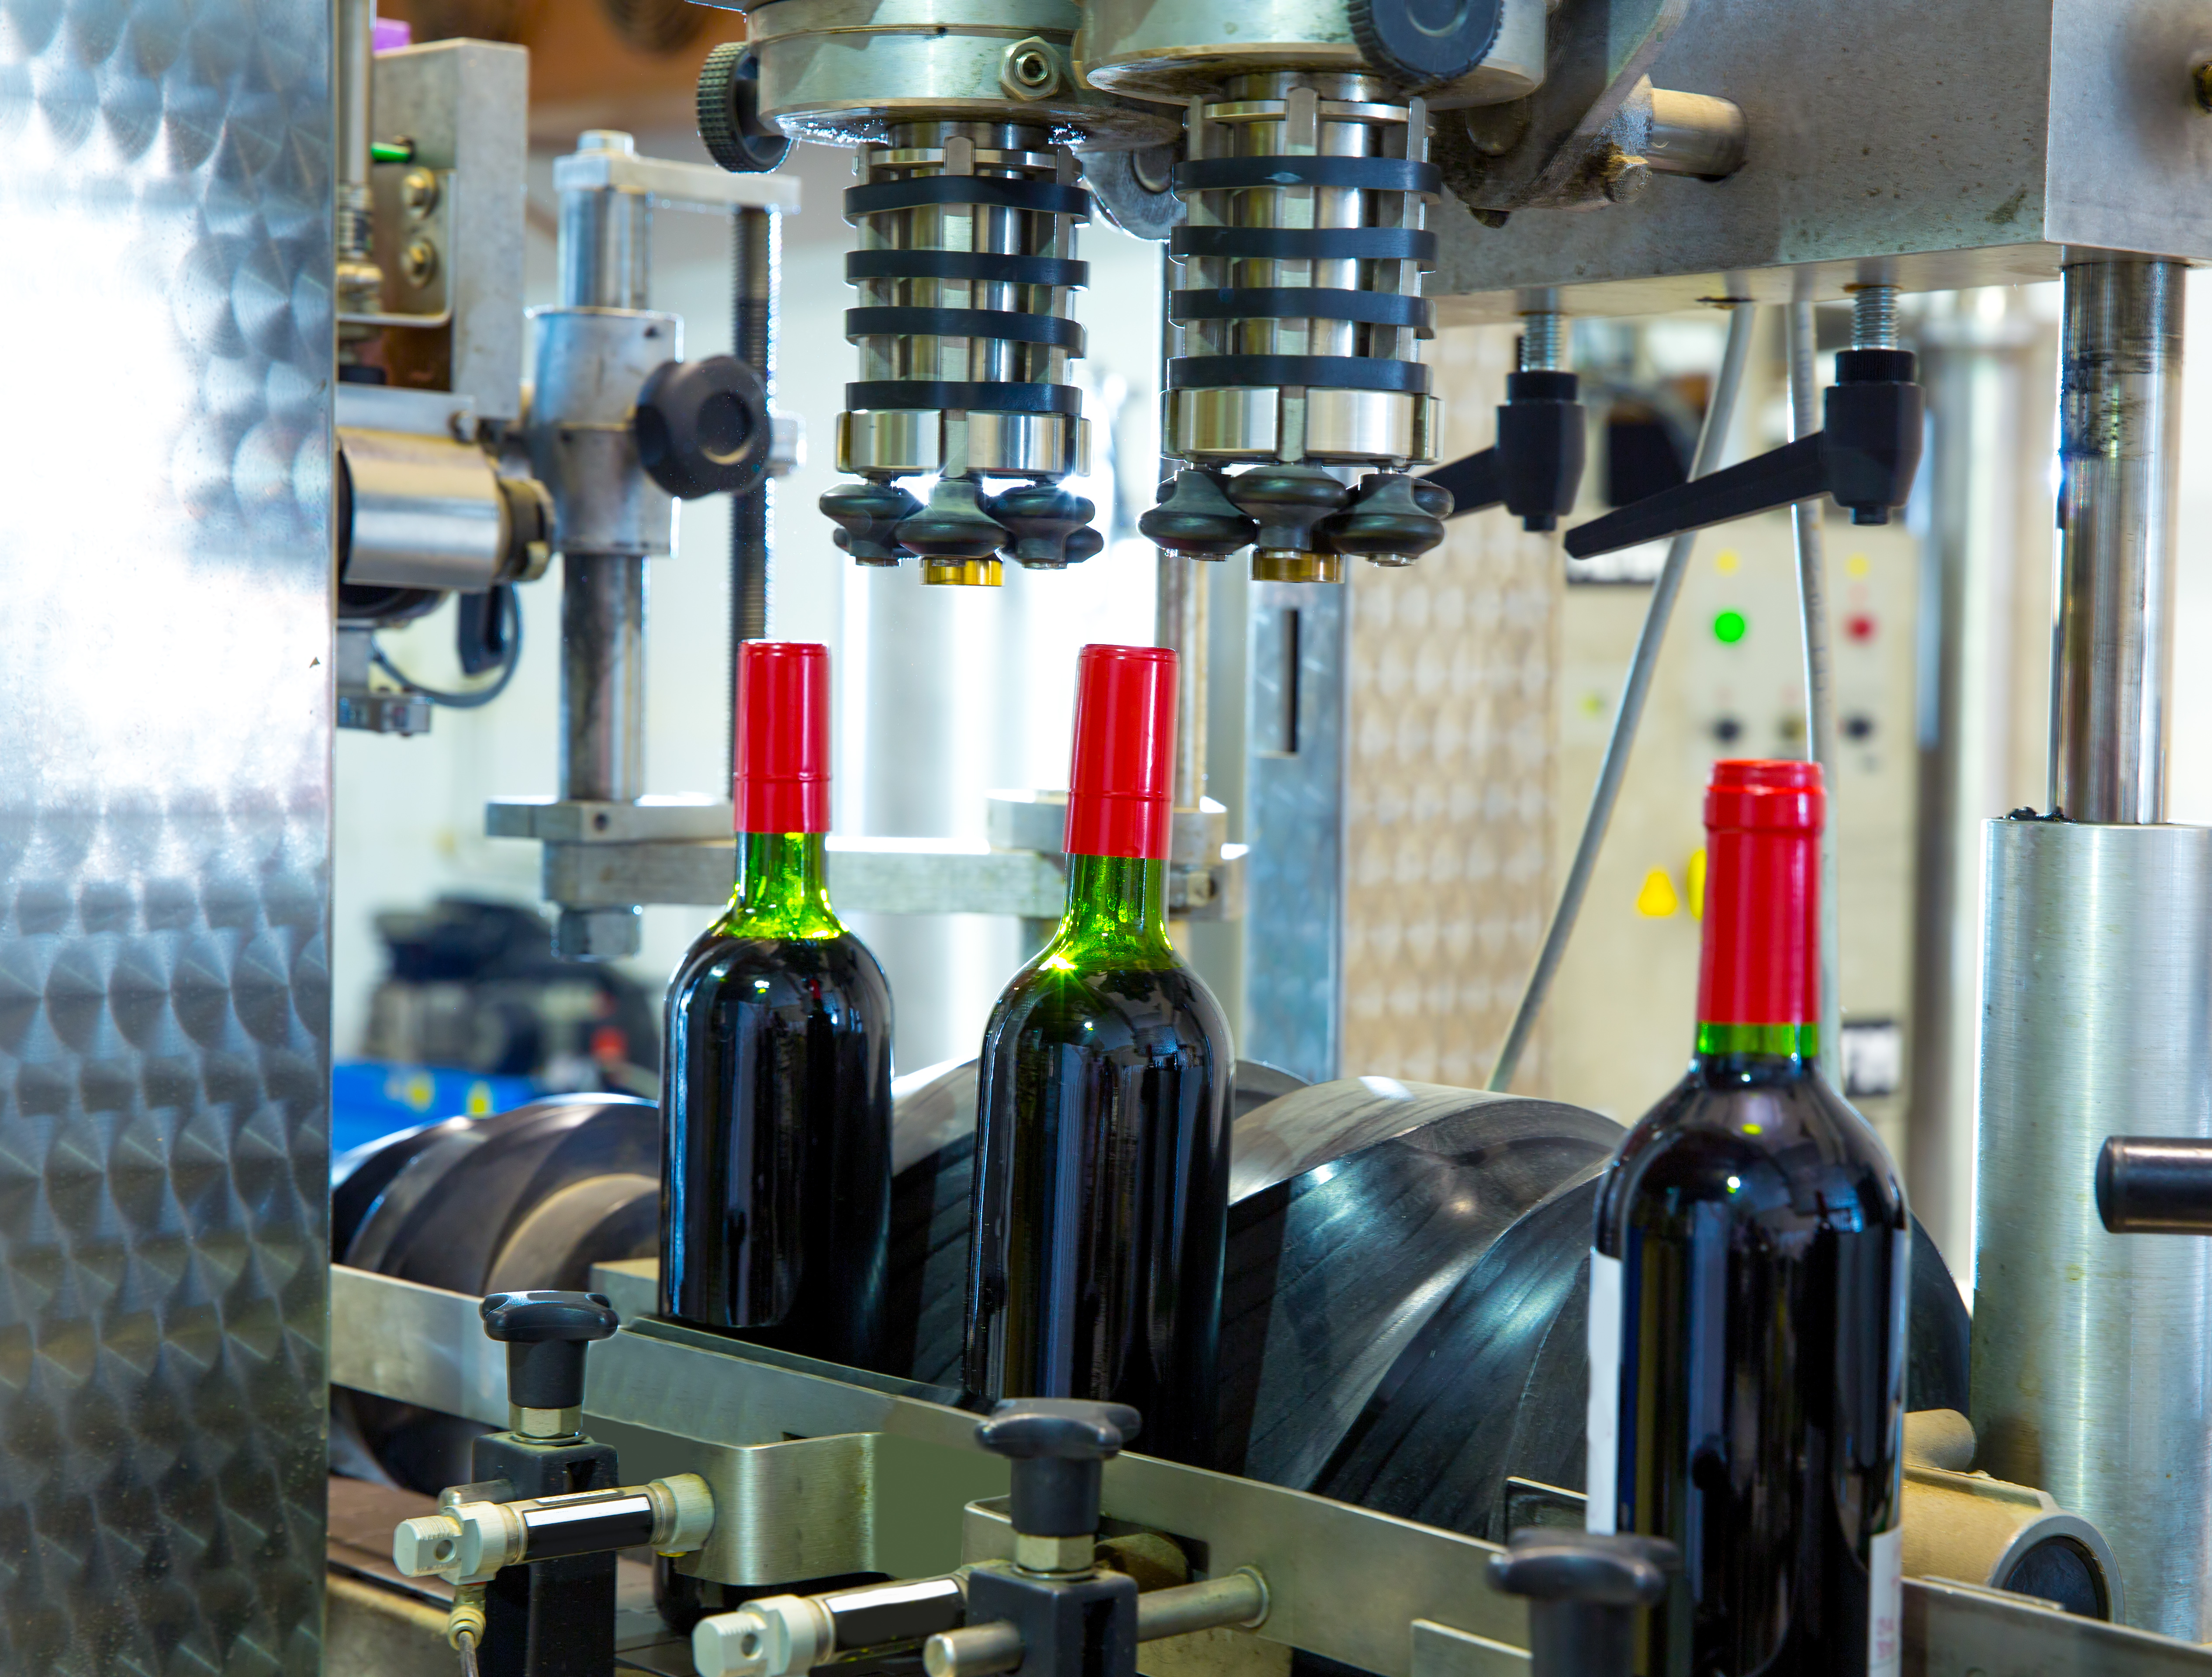 manufacturing wine at winery using industry 4.0 technologies